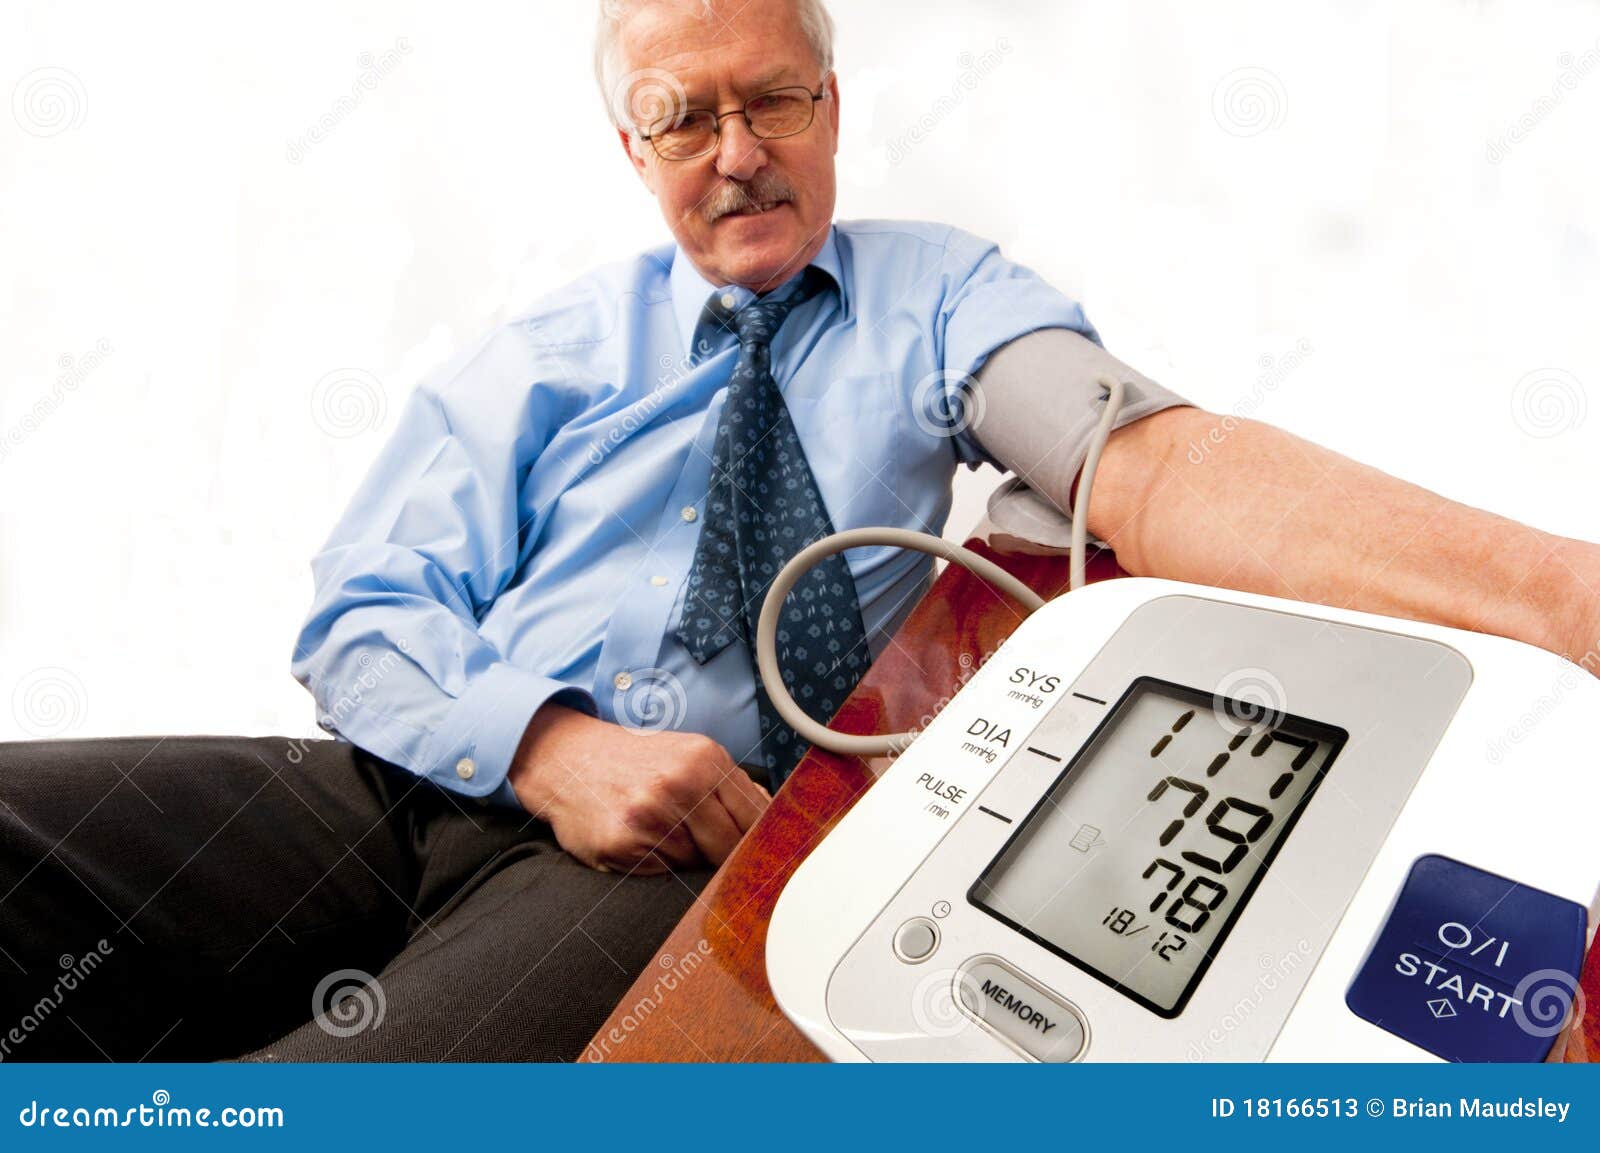 relieved senior man with low blood pressure.